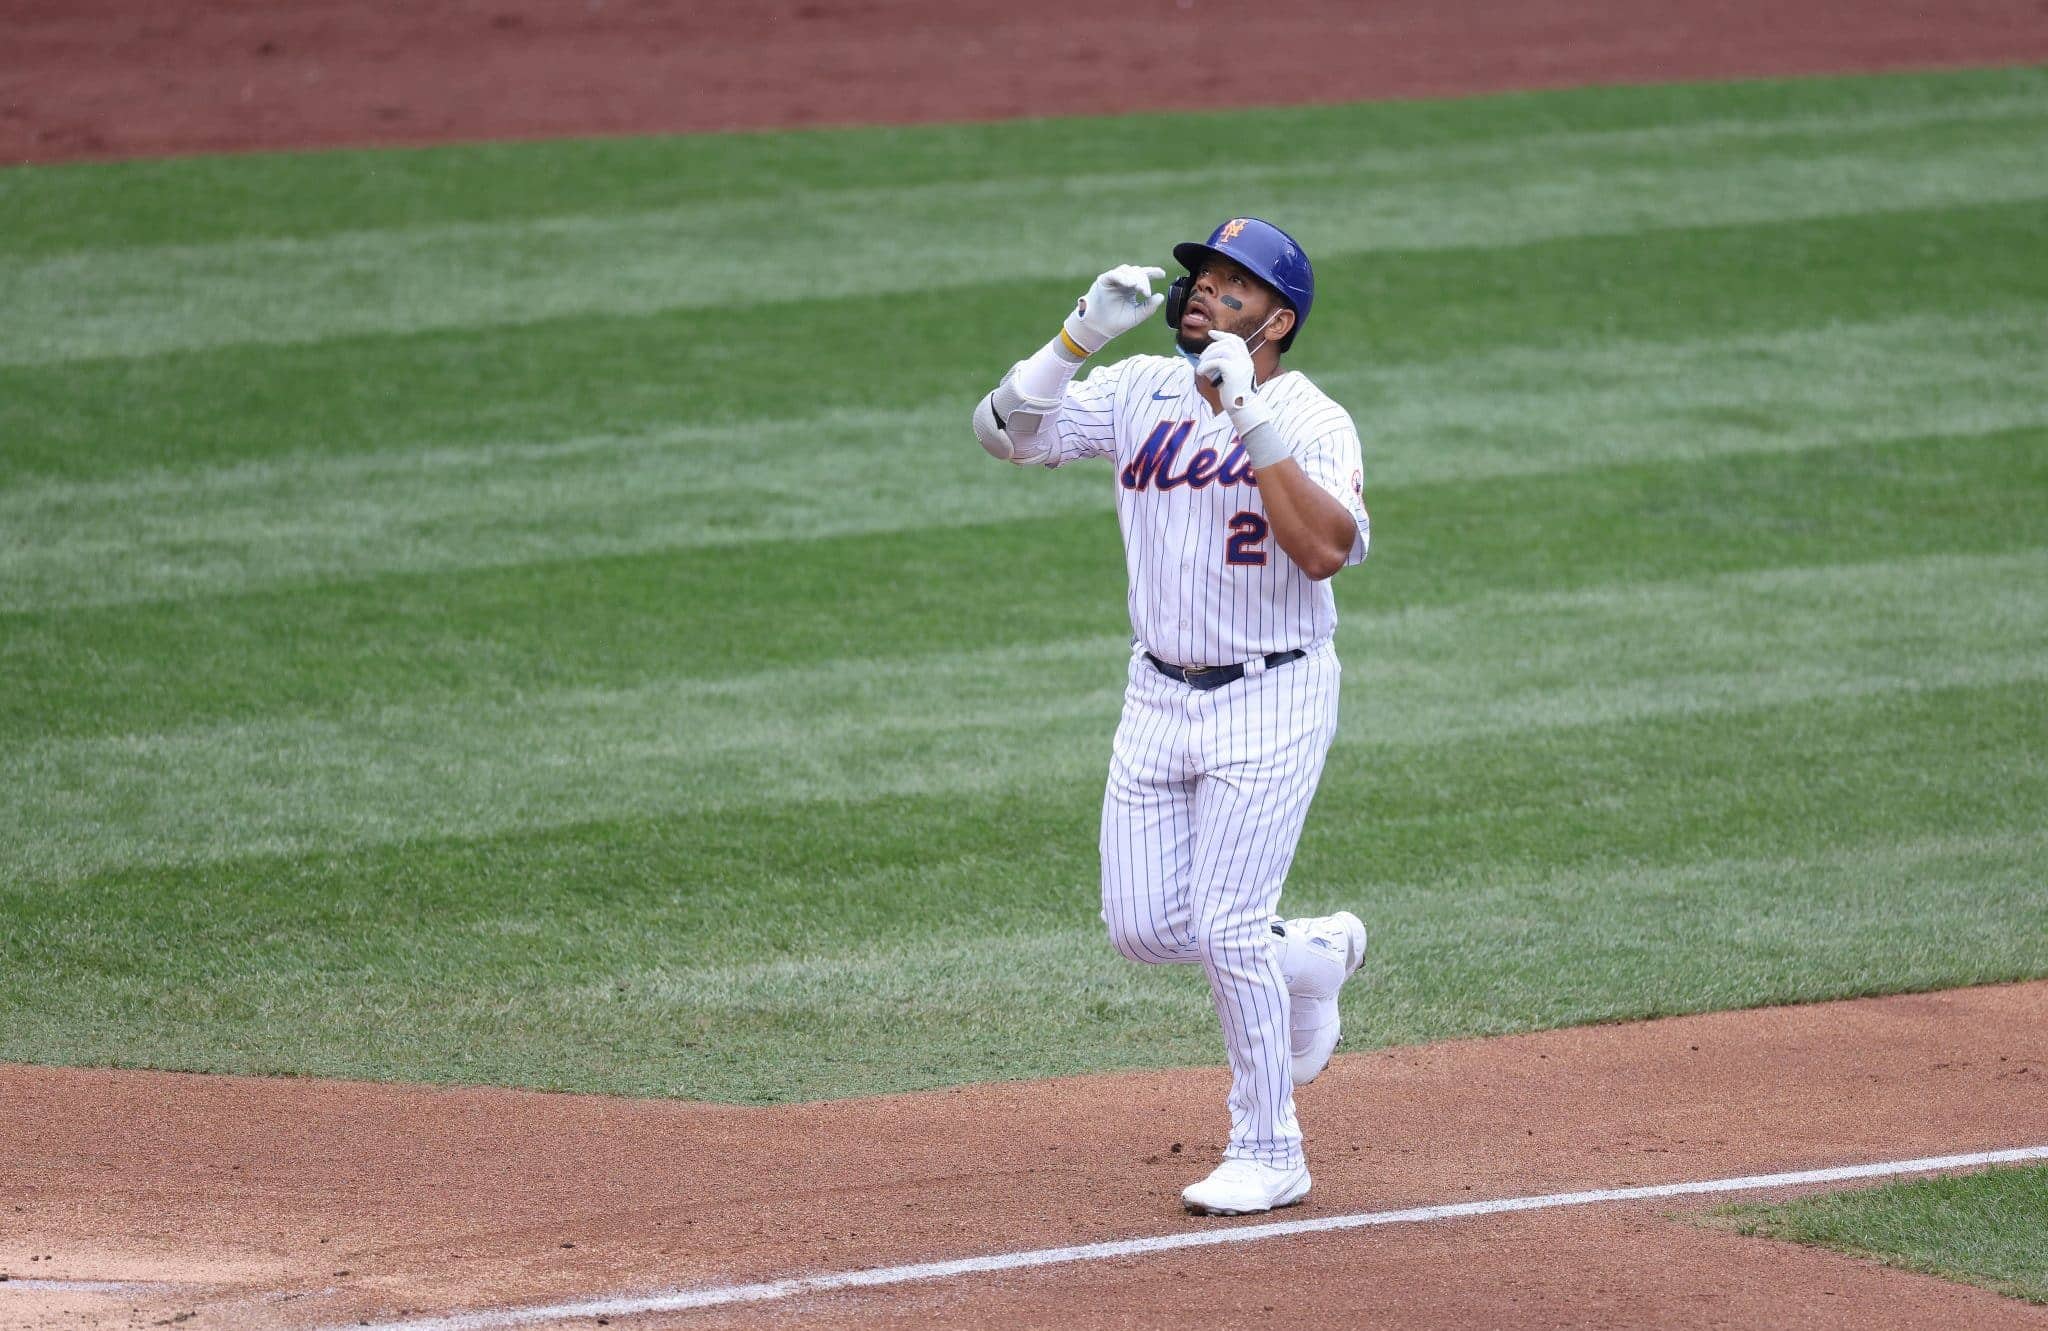 NEW YORK, NEW YORK - AUGUST 13: Dominic Smith #2 of the New York Mets celebrates his second inning home run against Austin Voth #50 of the Washington Nationals during their game at Citi Field on August 13, 2020 in New York City.